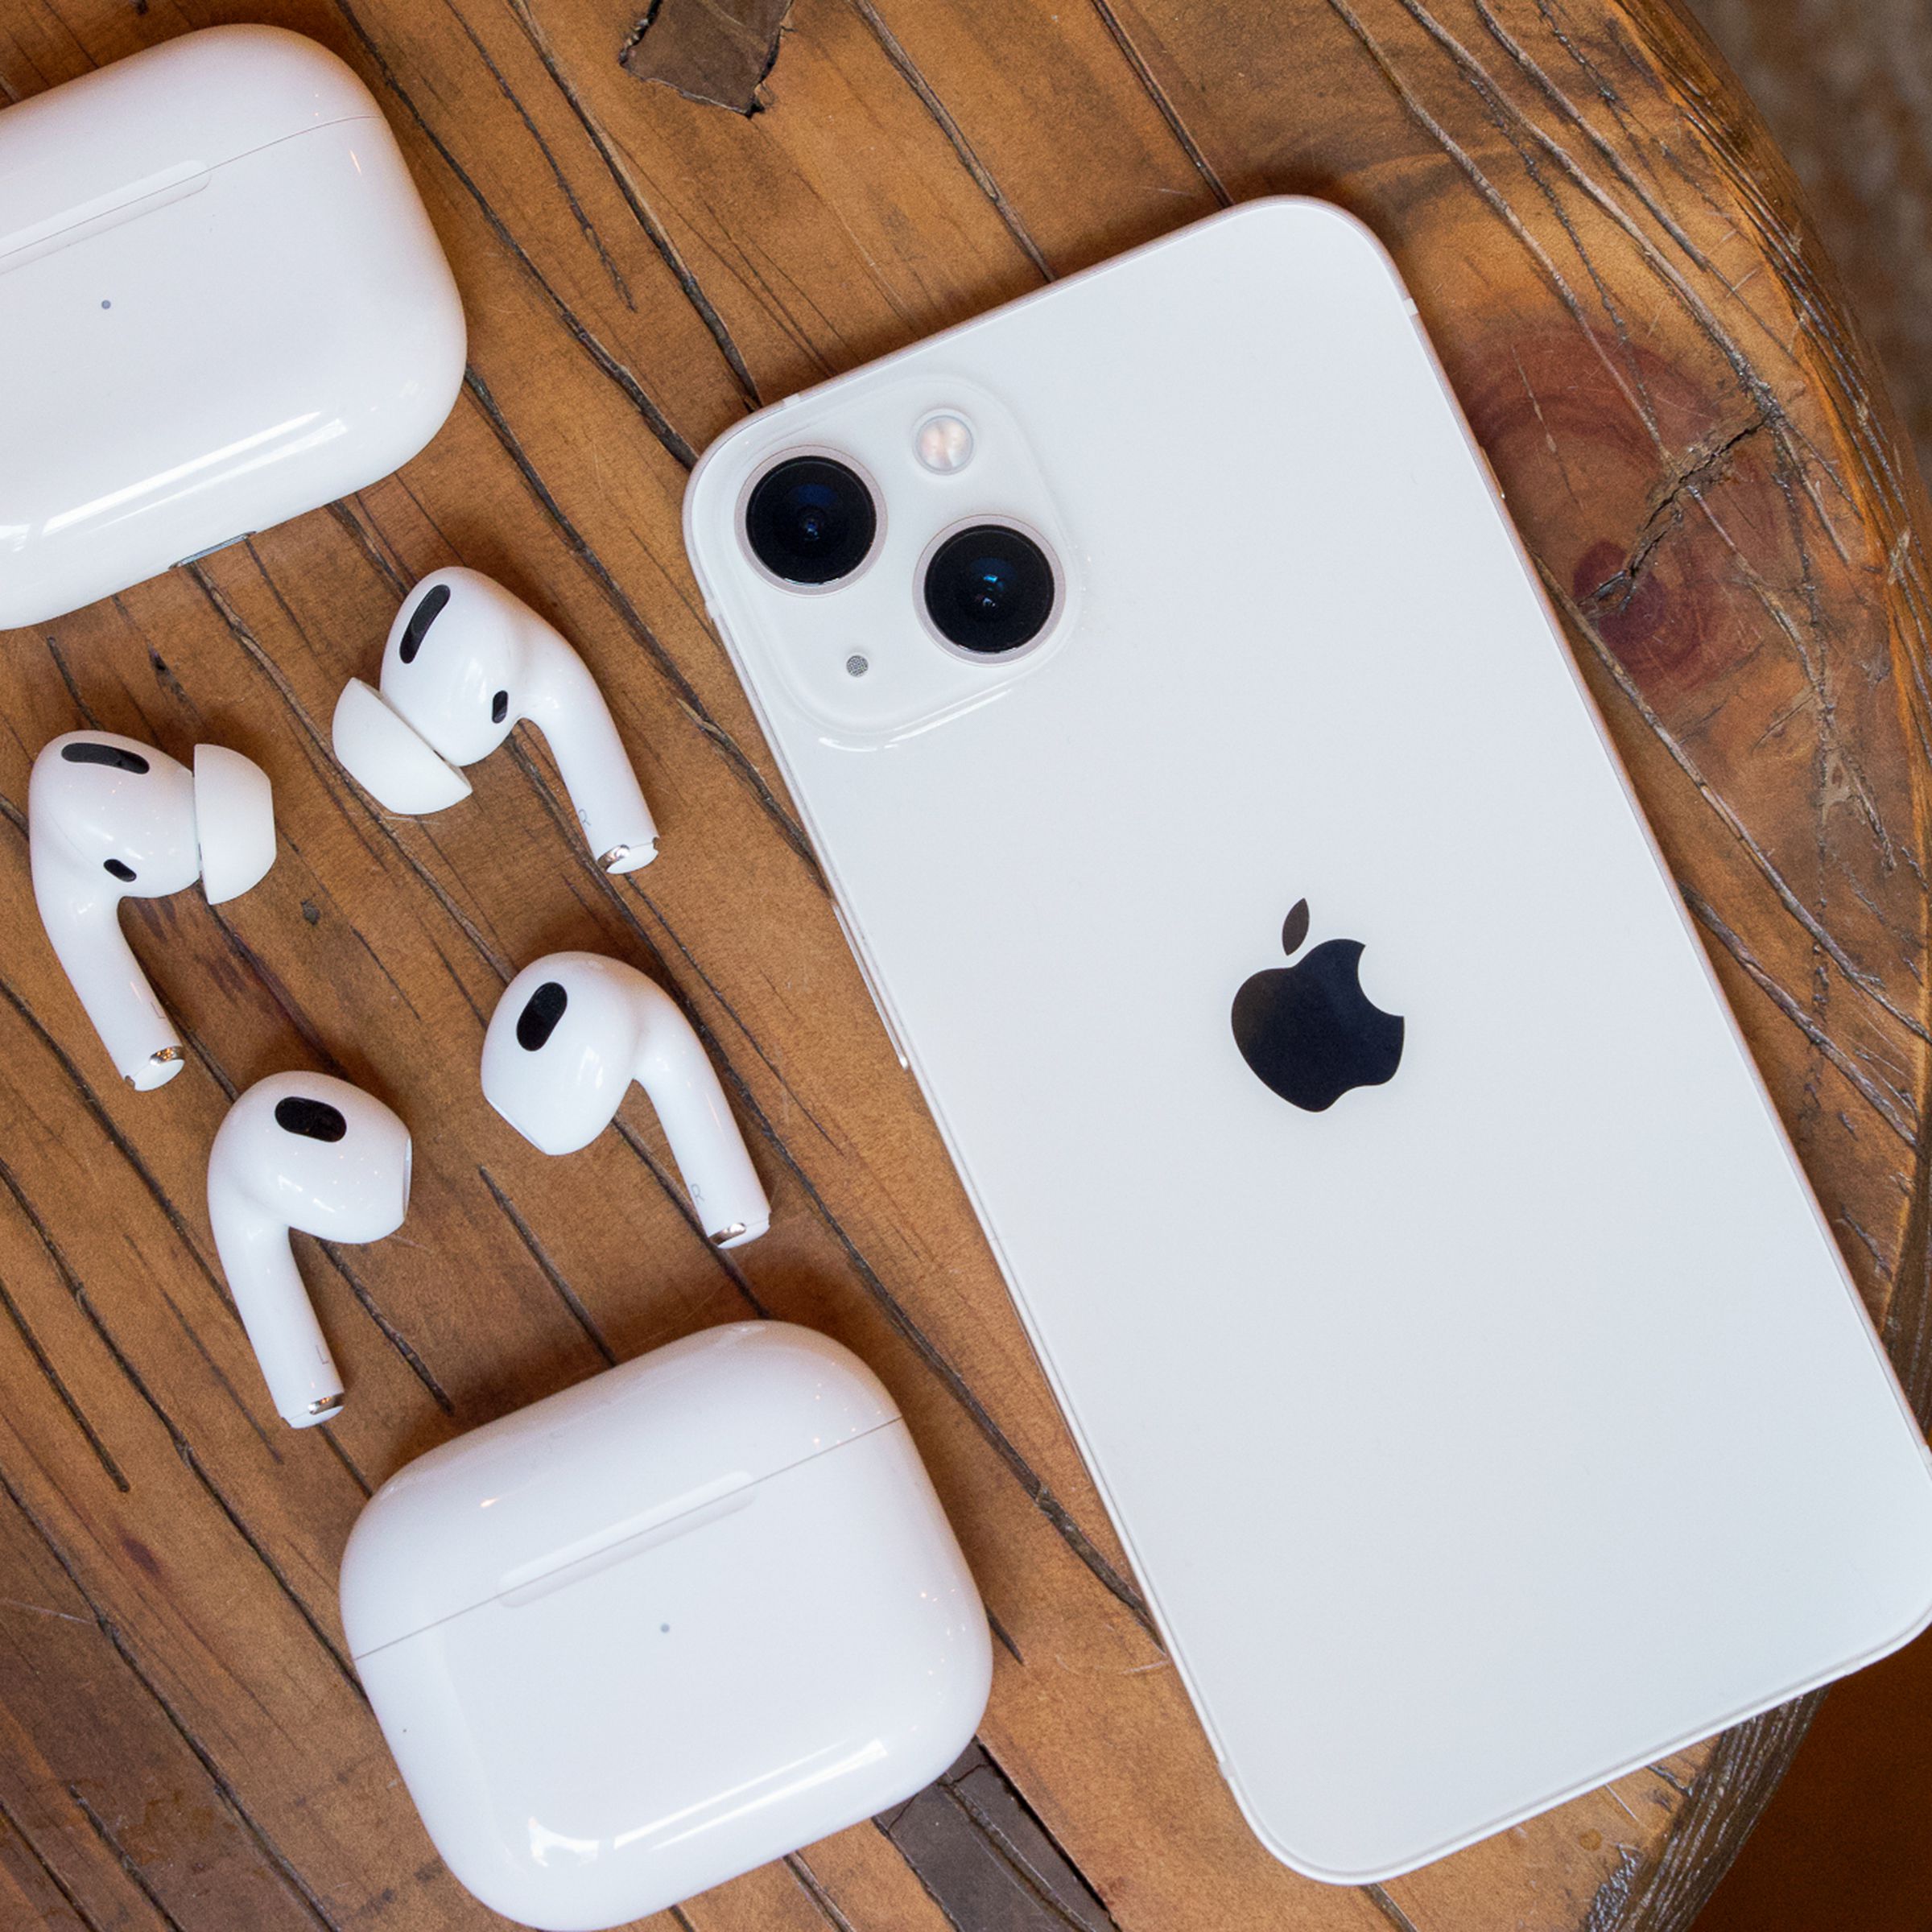 AirPods Pro, AirPods, and an iPhone on a table.